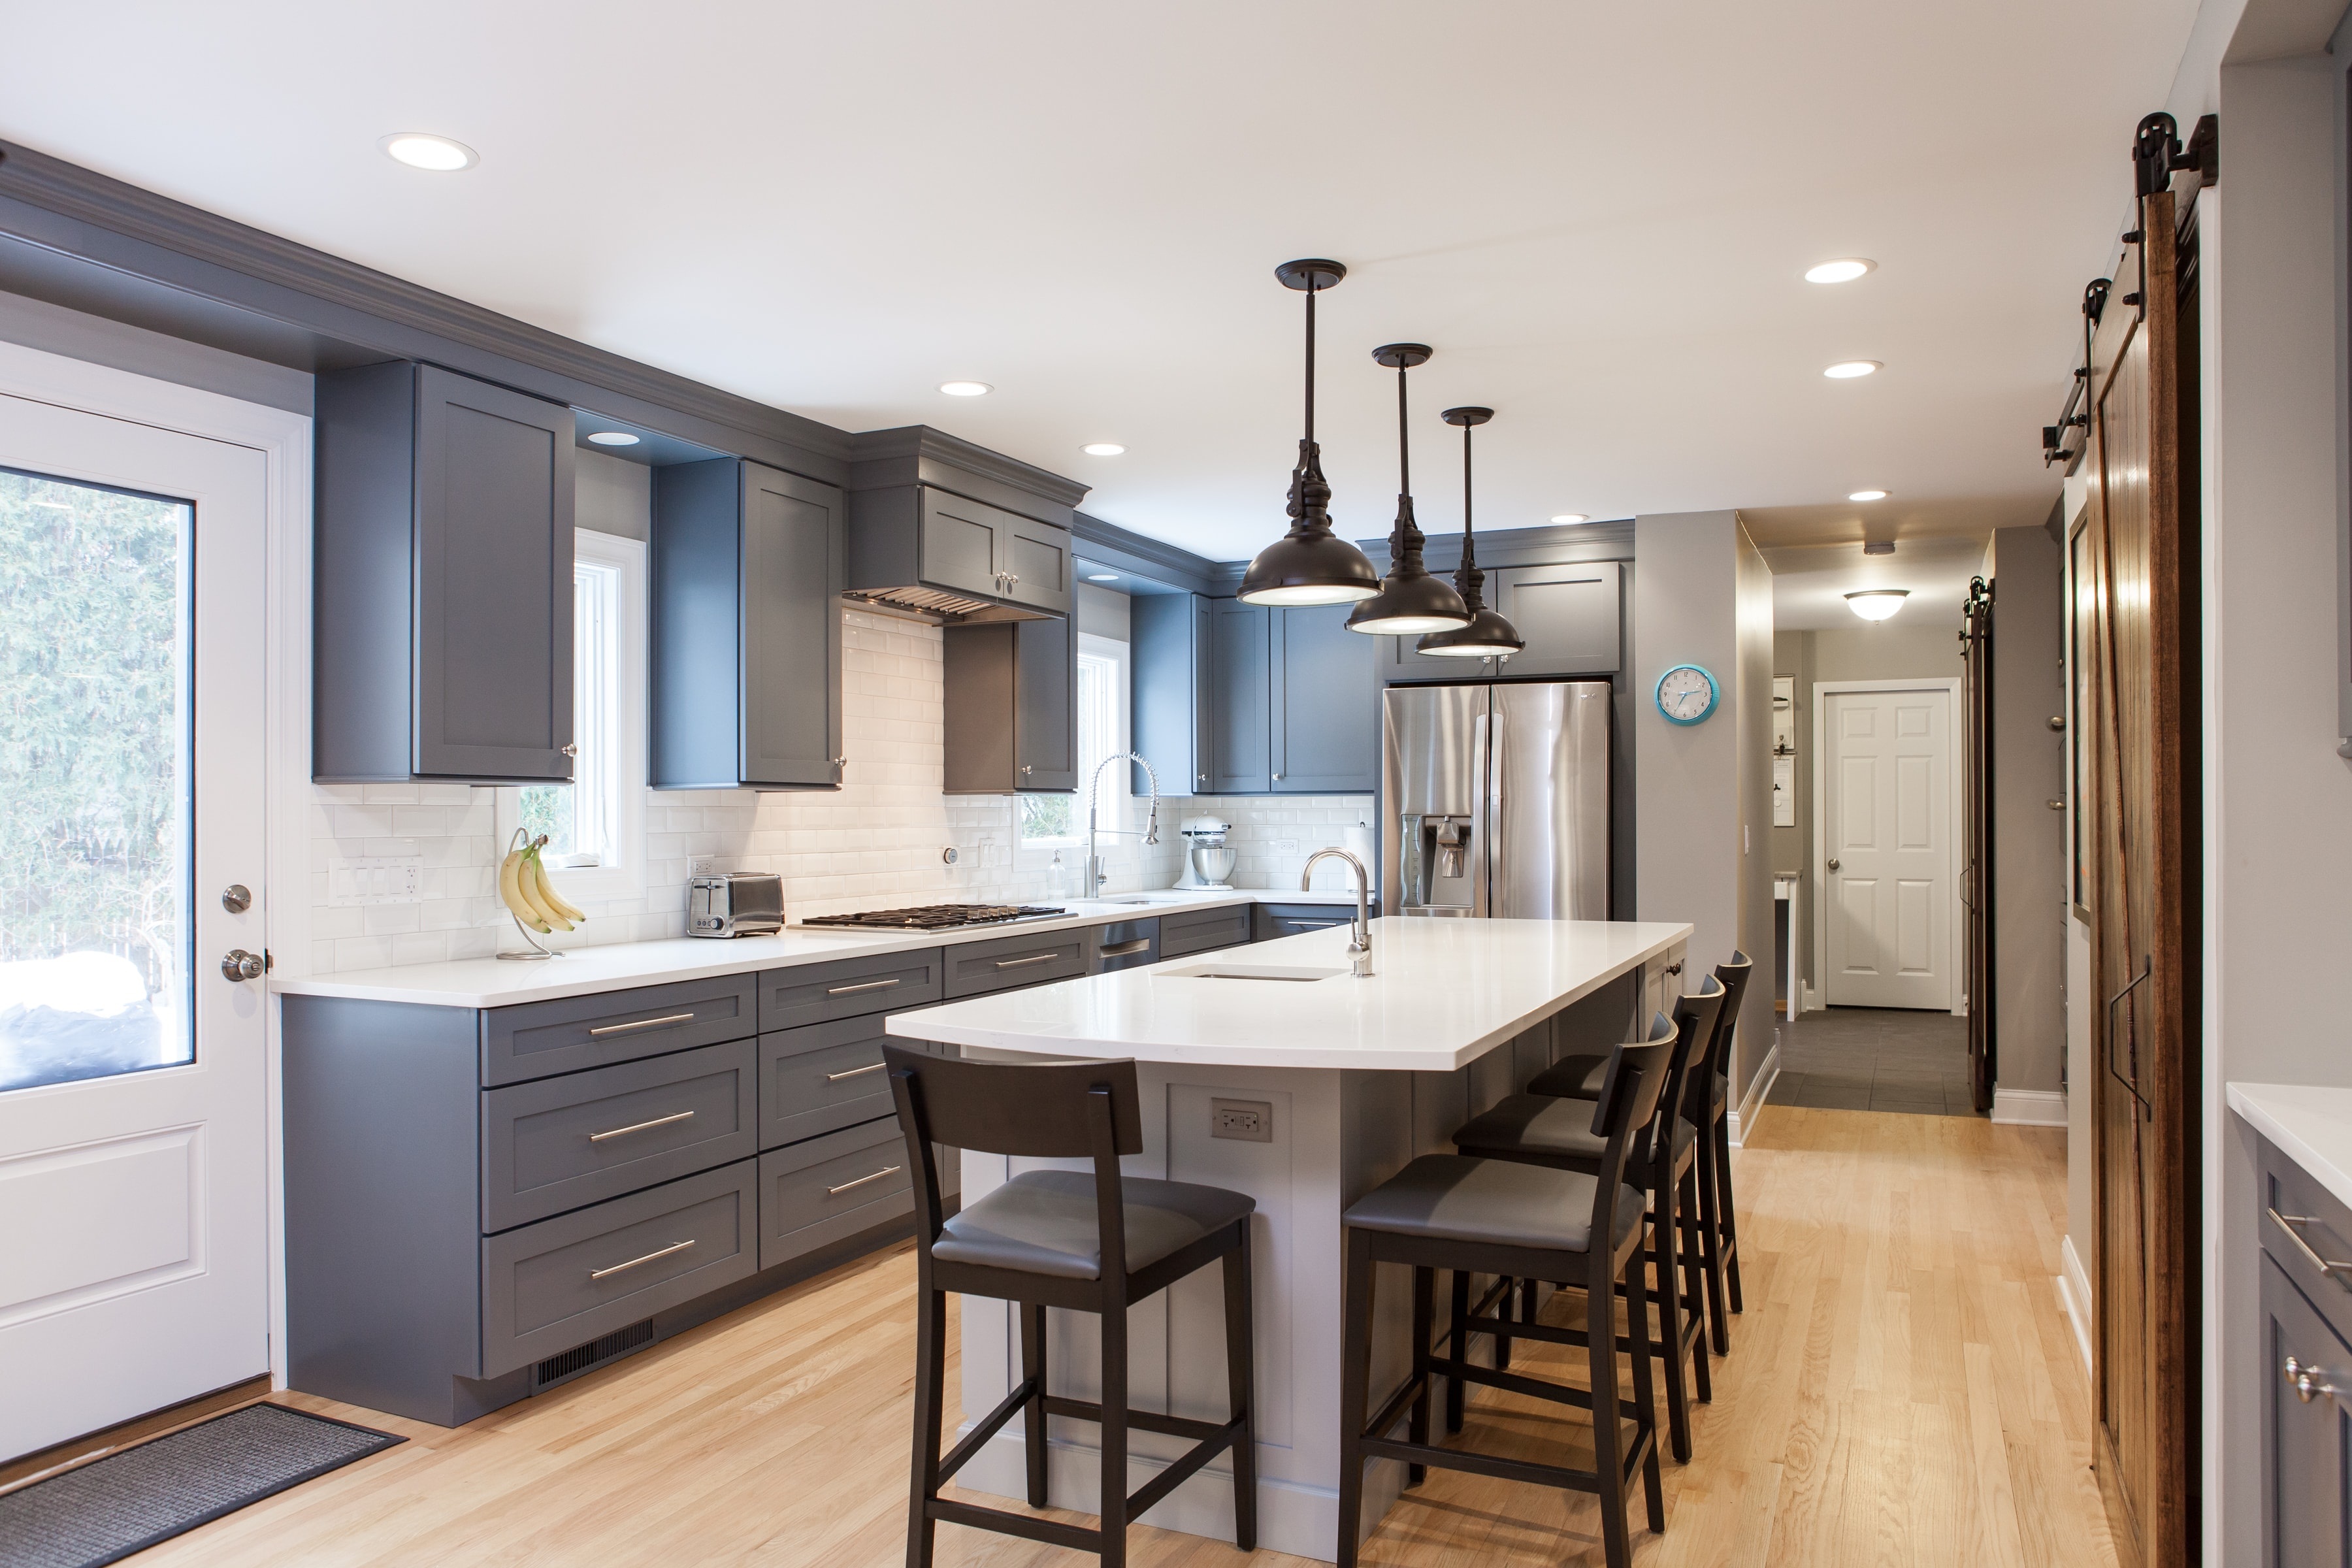 Create More Space With a Custom Remodeling Project